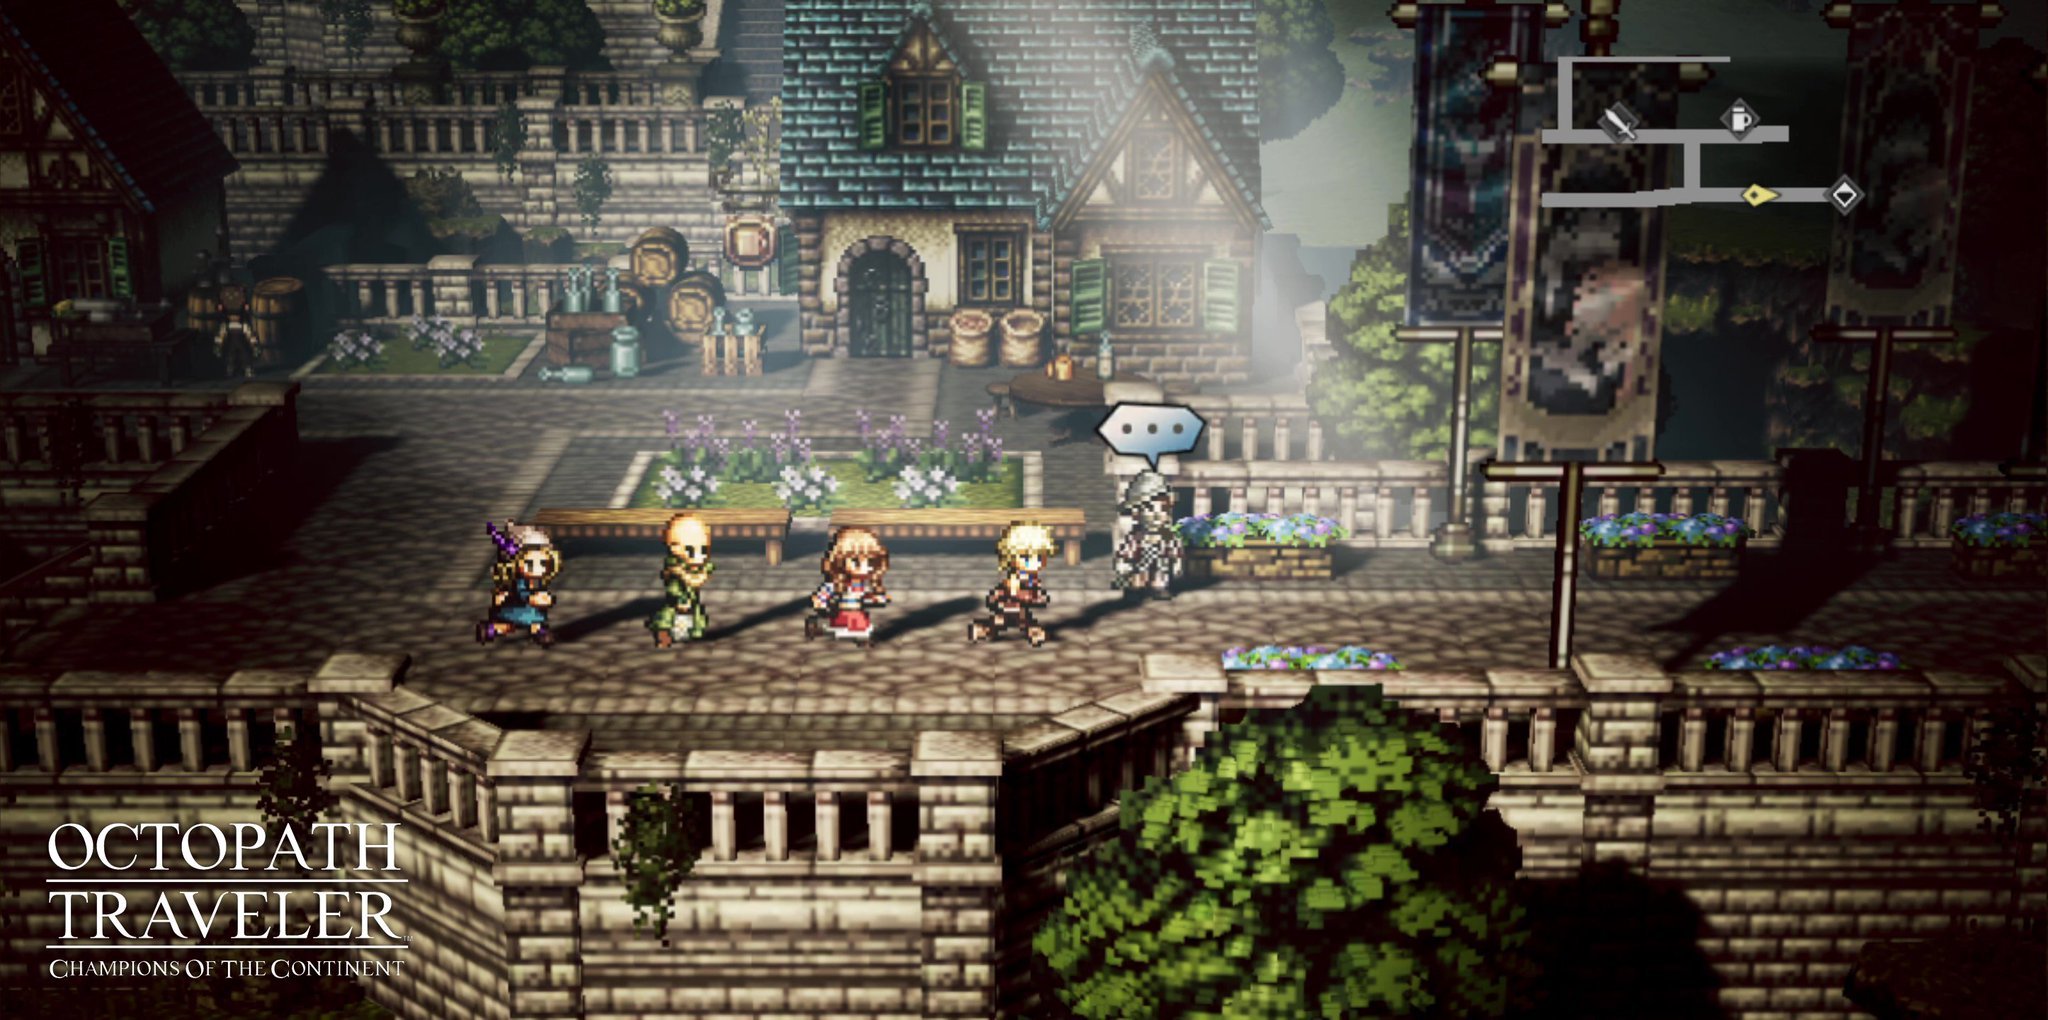 ‘Octopath Traveler: Champions of the Continent’ Now Available on iOS and Android Globally, Servers Go Live Later Today